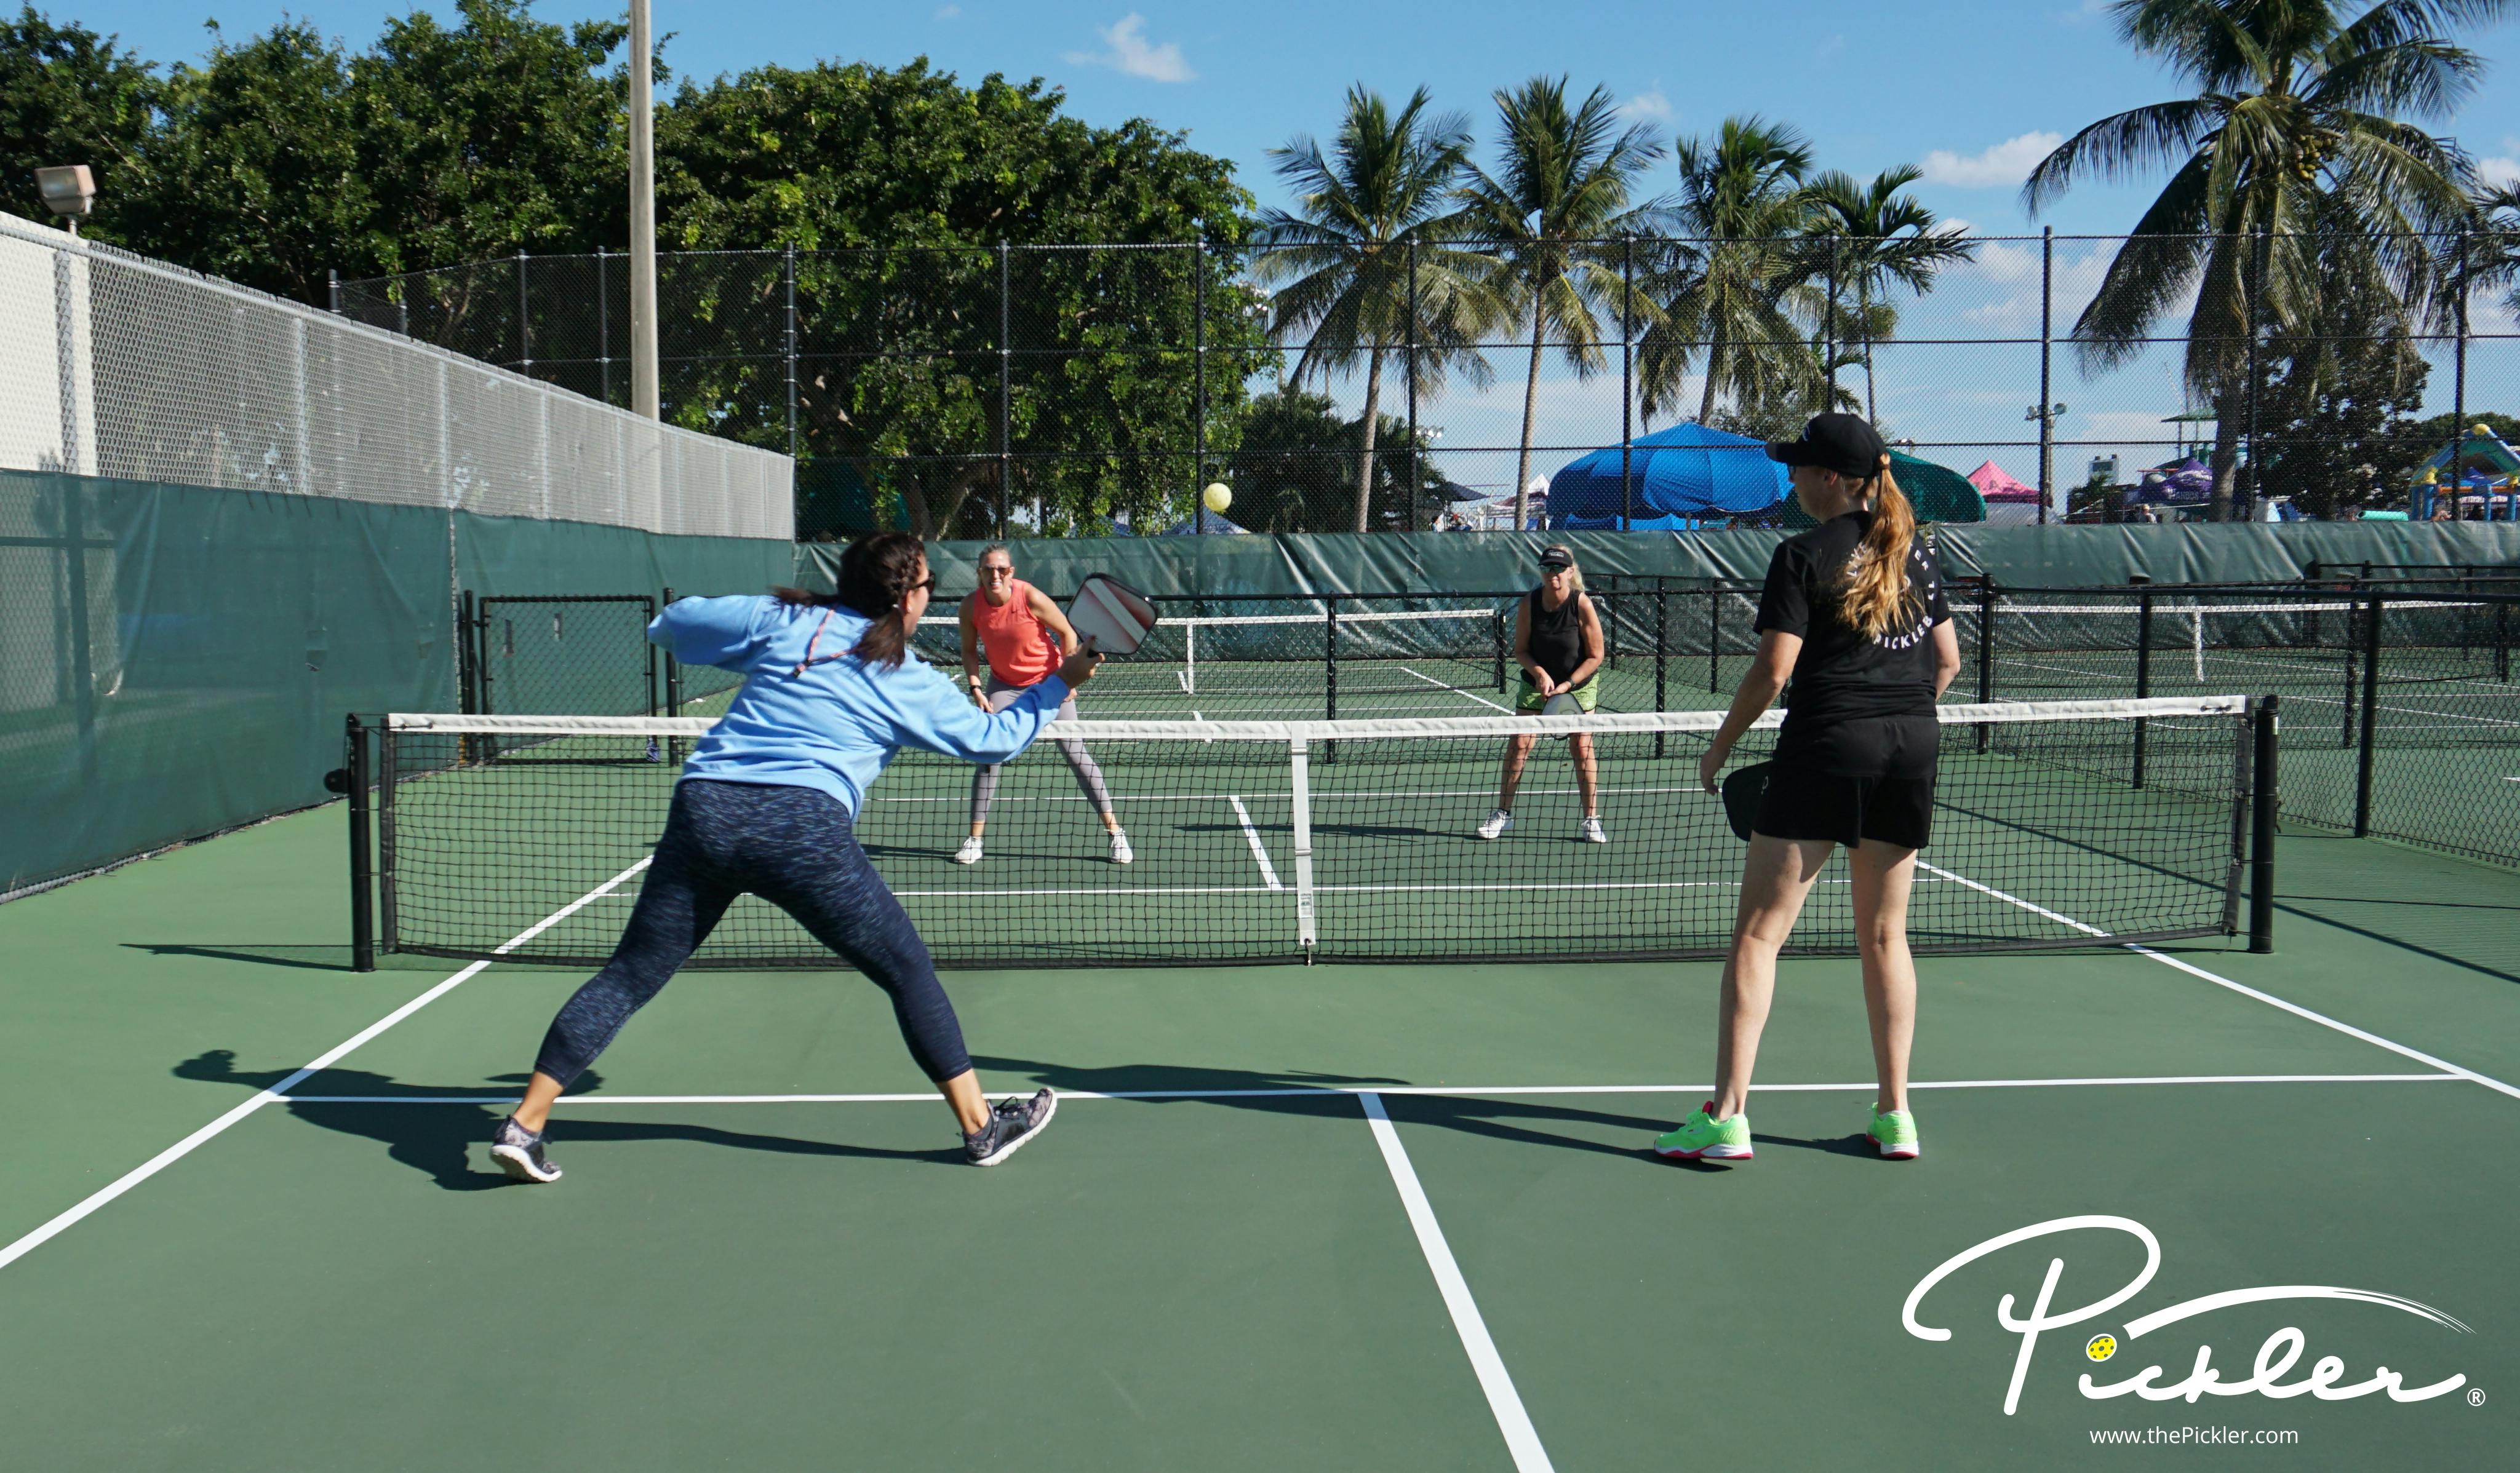 Lessons from the Pickleball Court – Be Patient | Pickler Pickleball